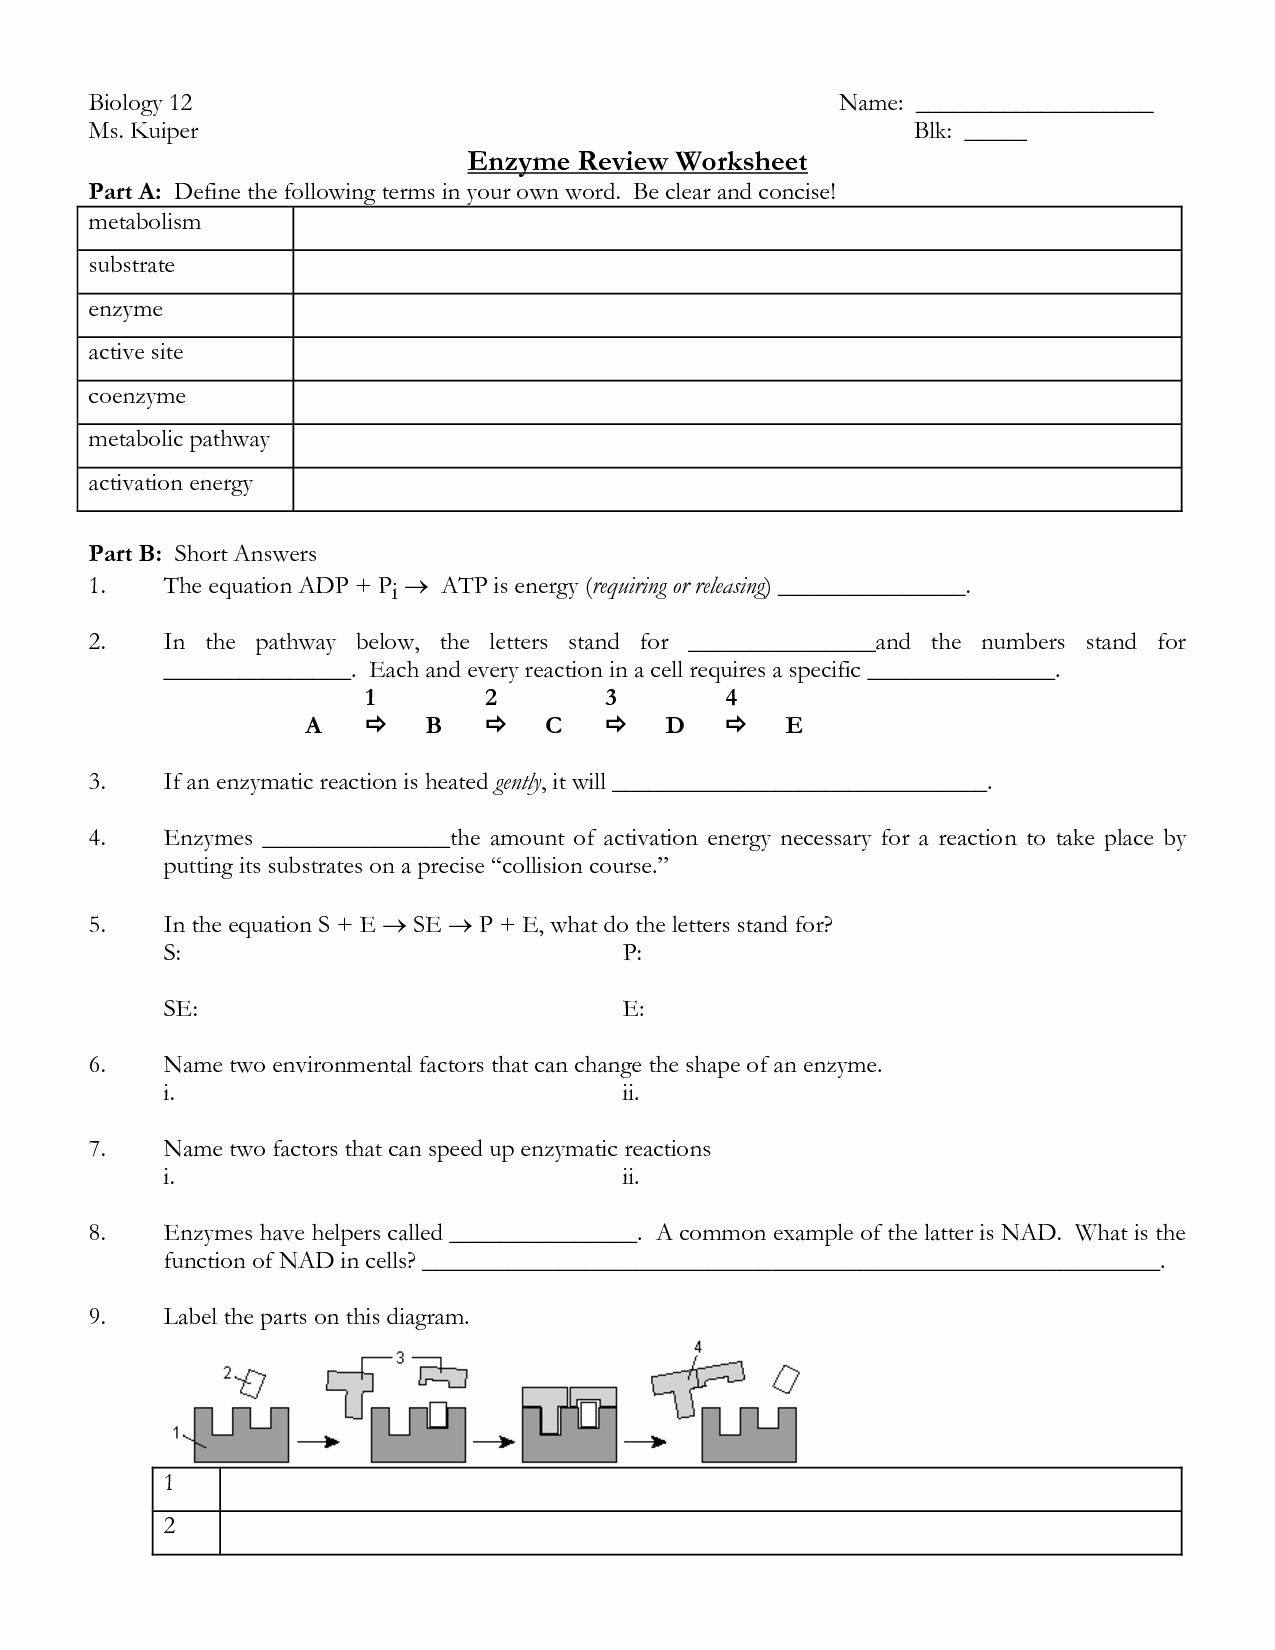 Enzyme Reactions Worksheet Answer Key Best Of 14 Best Of Enzymes Worksheet Answer Key Enzymes